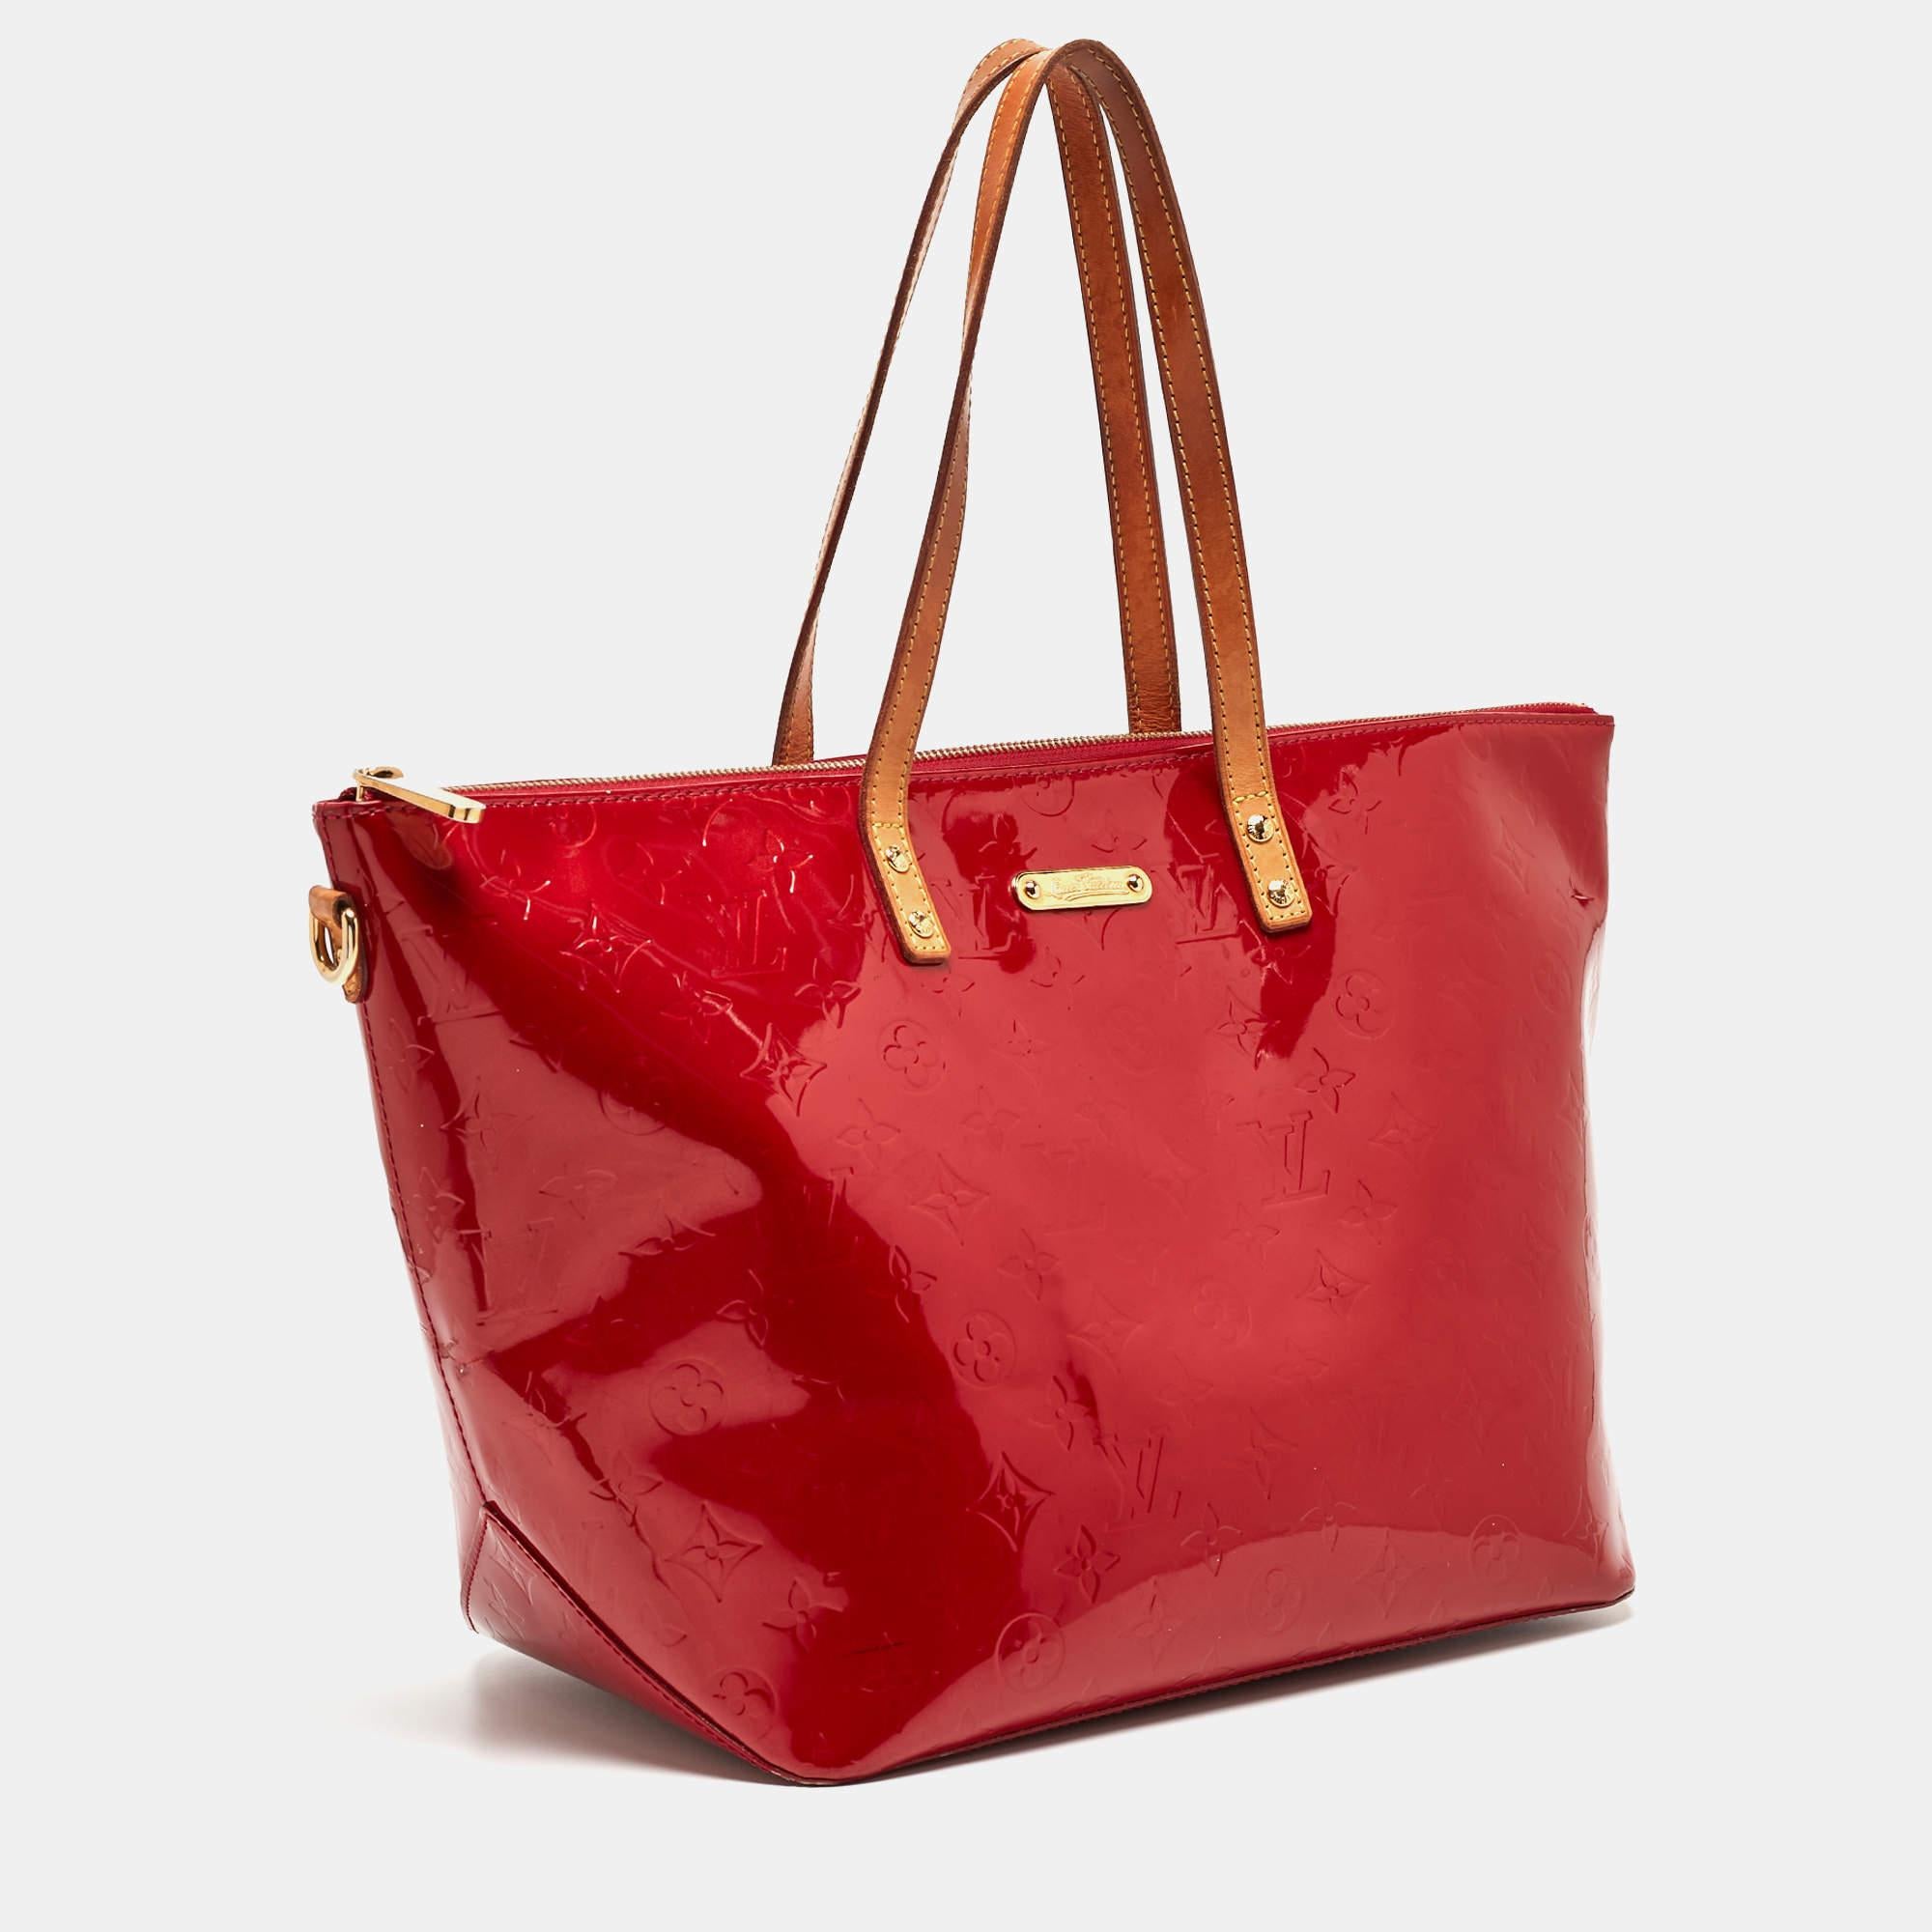 Designer bags are ideal companions for ample occasions! Here we have a fashion-meets-functionality piece crafted with precision. It has been equipped with a well-sized interior that can easily fit all your essentials.

Includes: Original Dustbag